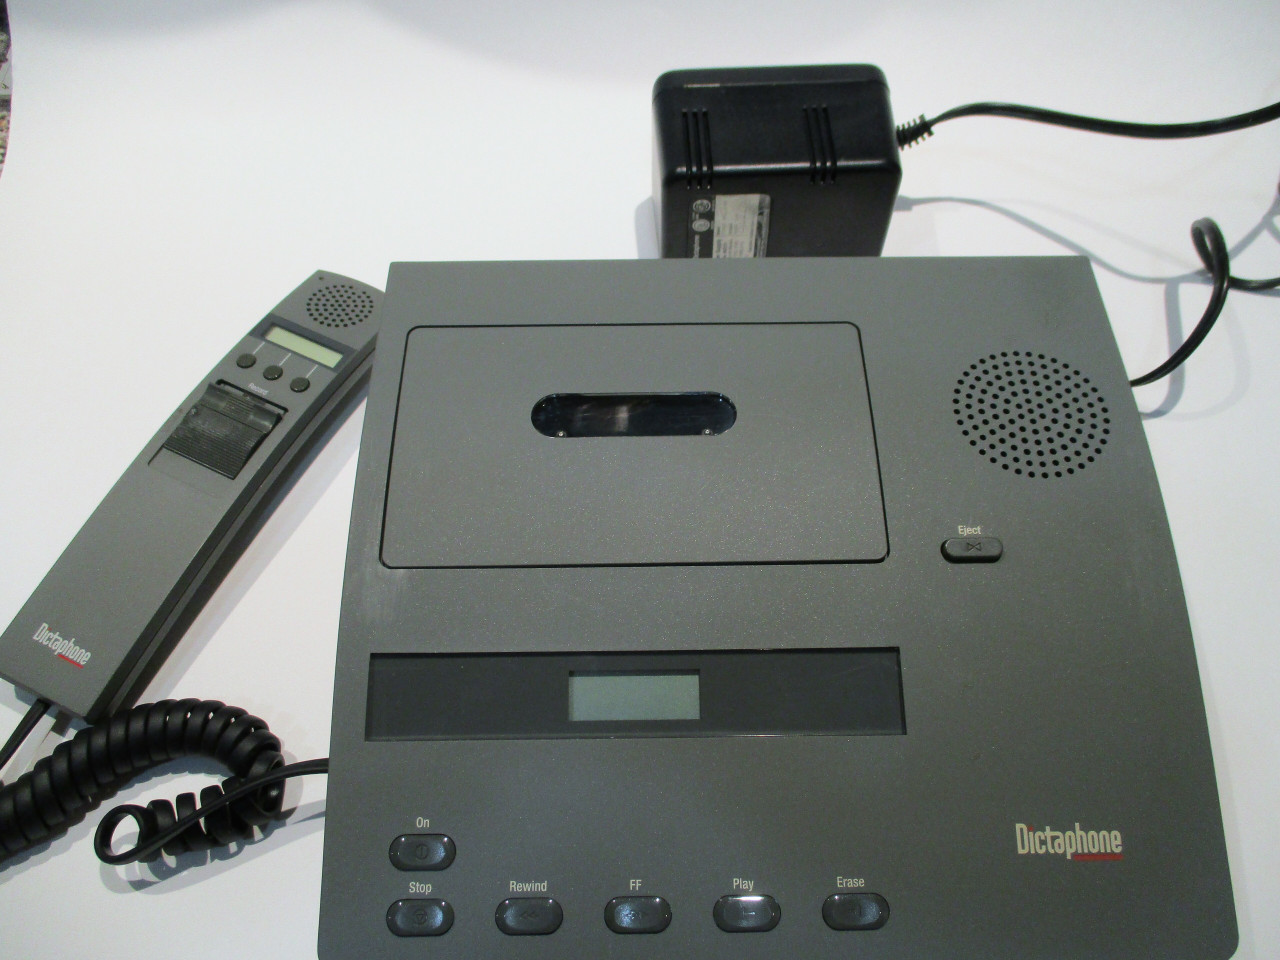 Dictaphone 2740 Standard Cassette Dictation Machine with Microphone